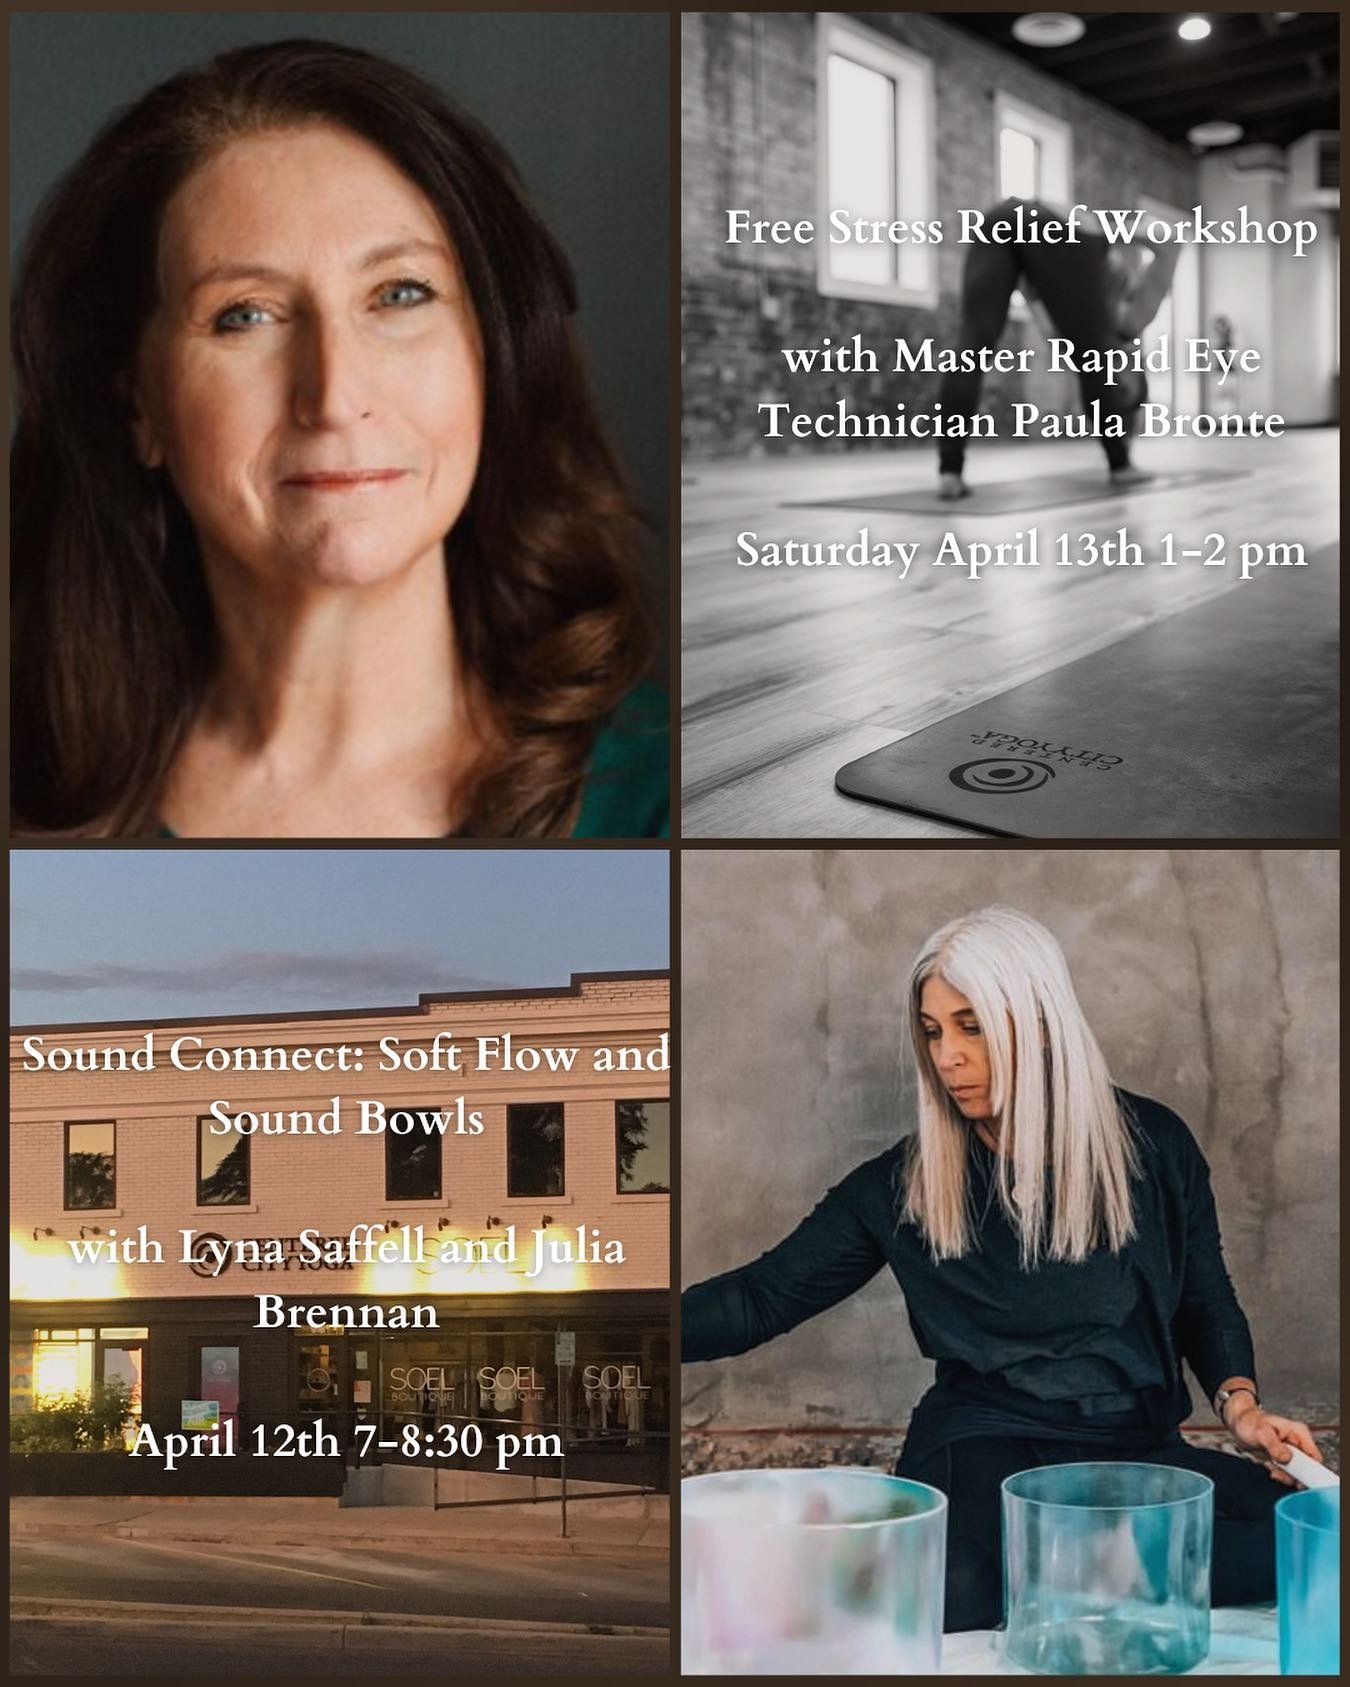 We have two incredible events happening this weekend at our 9th and 9th studio! 🤍🙏

Friday evening @wasatchwildflower Lyna Saffell and Julia Brennan will be guiding Soul Connect: Sound Bowls and Soft Flow | 7-8:30 pm 🧘&zwj;♀️

&amp; 

Saturday aft